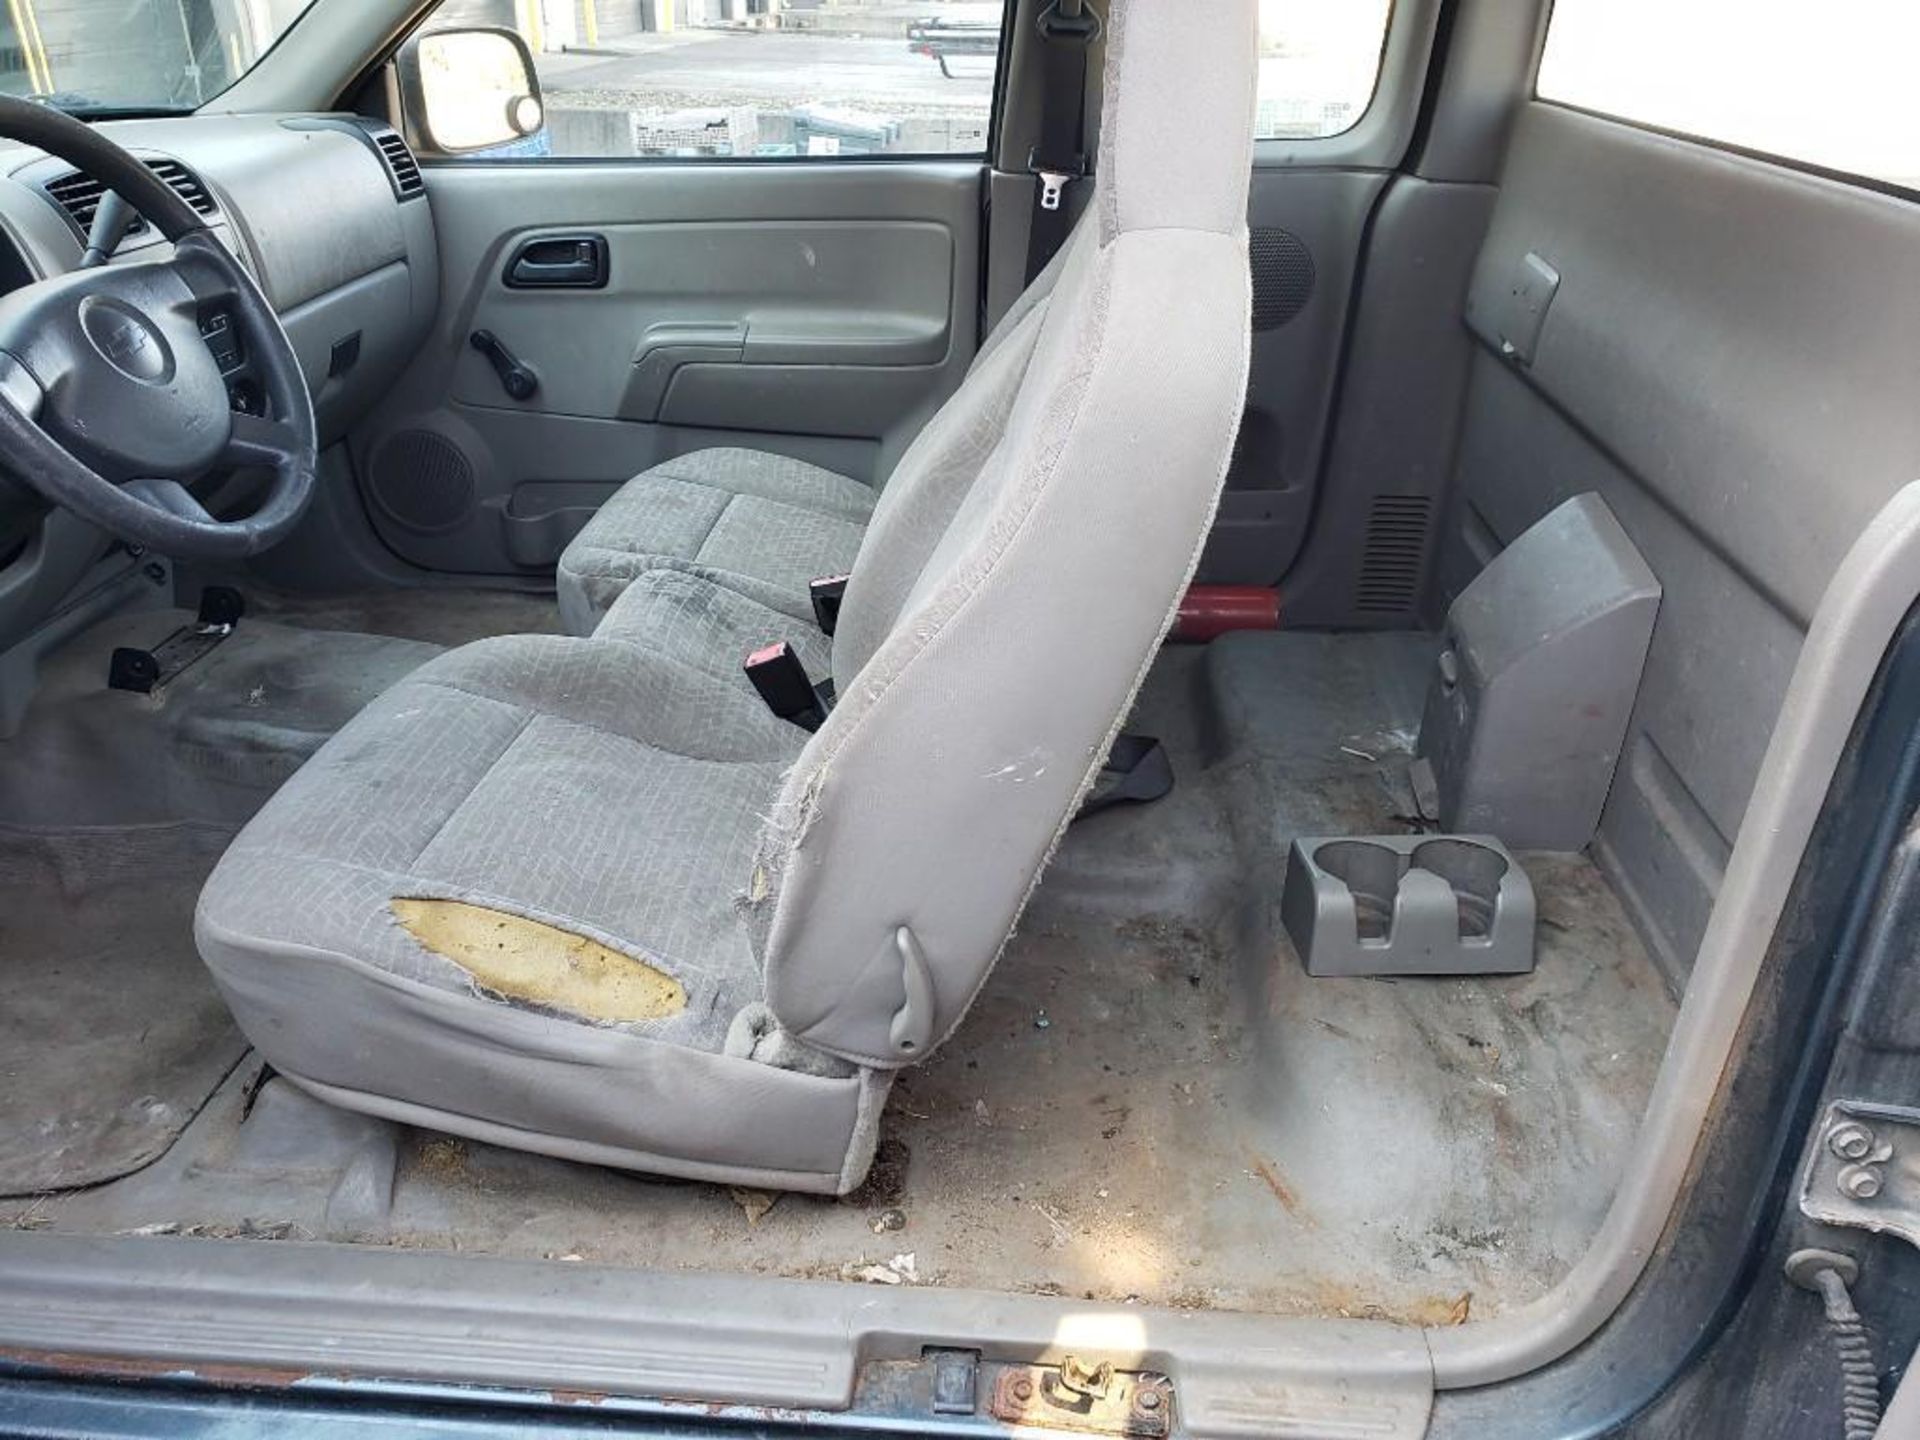 2006 Chevrolet Colorado. VIN 1GCCS196868135452. Frame has rust and one hole can be seen. - Image 6 of 25